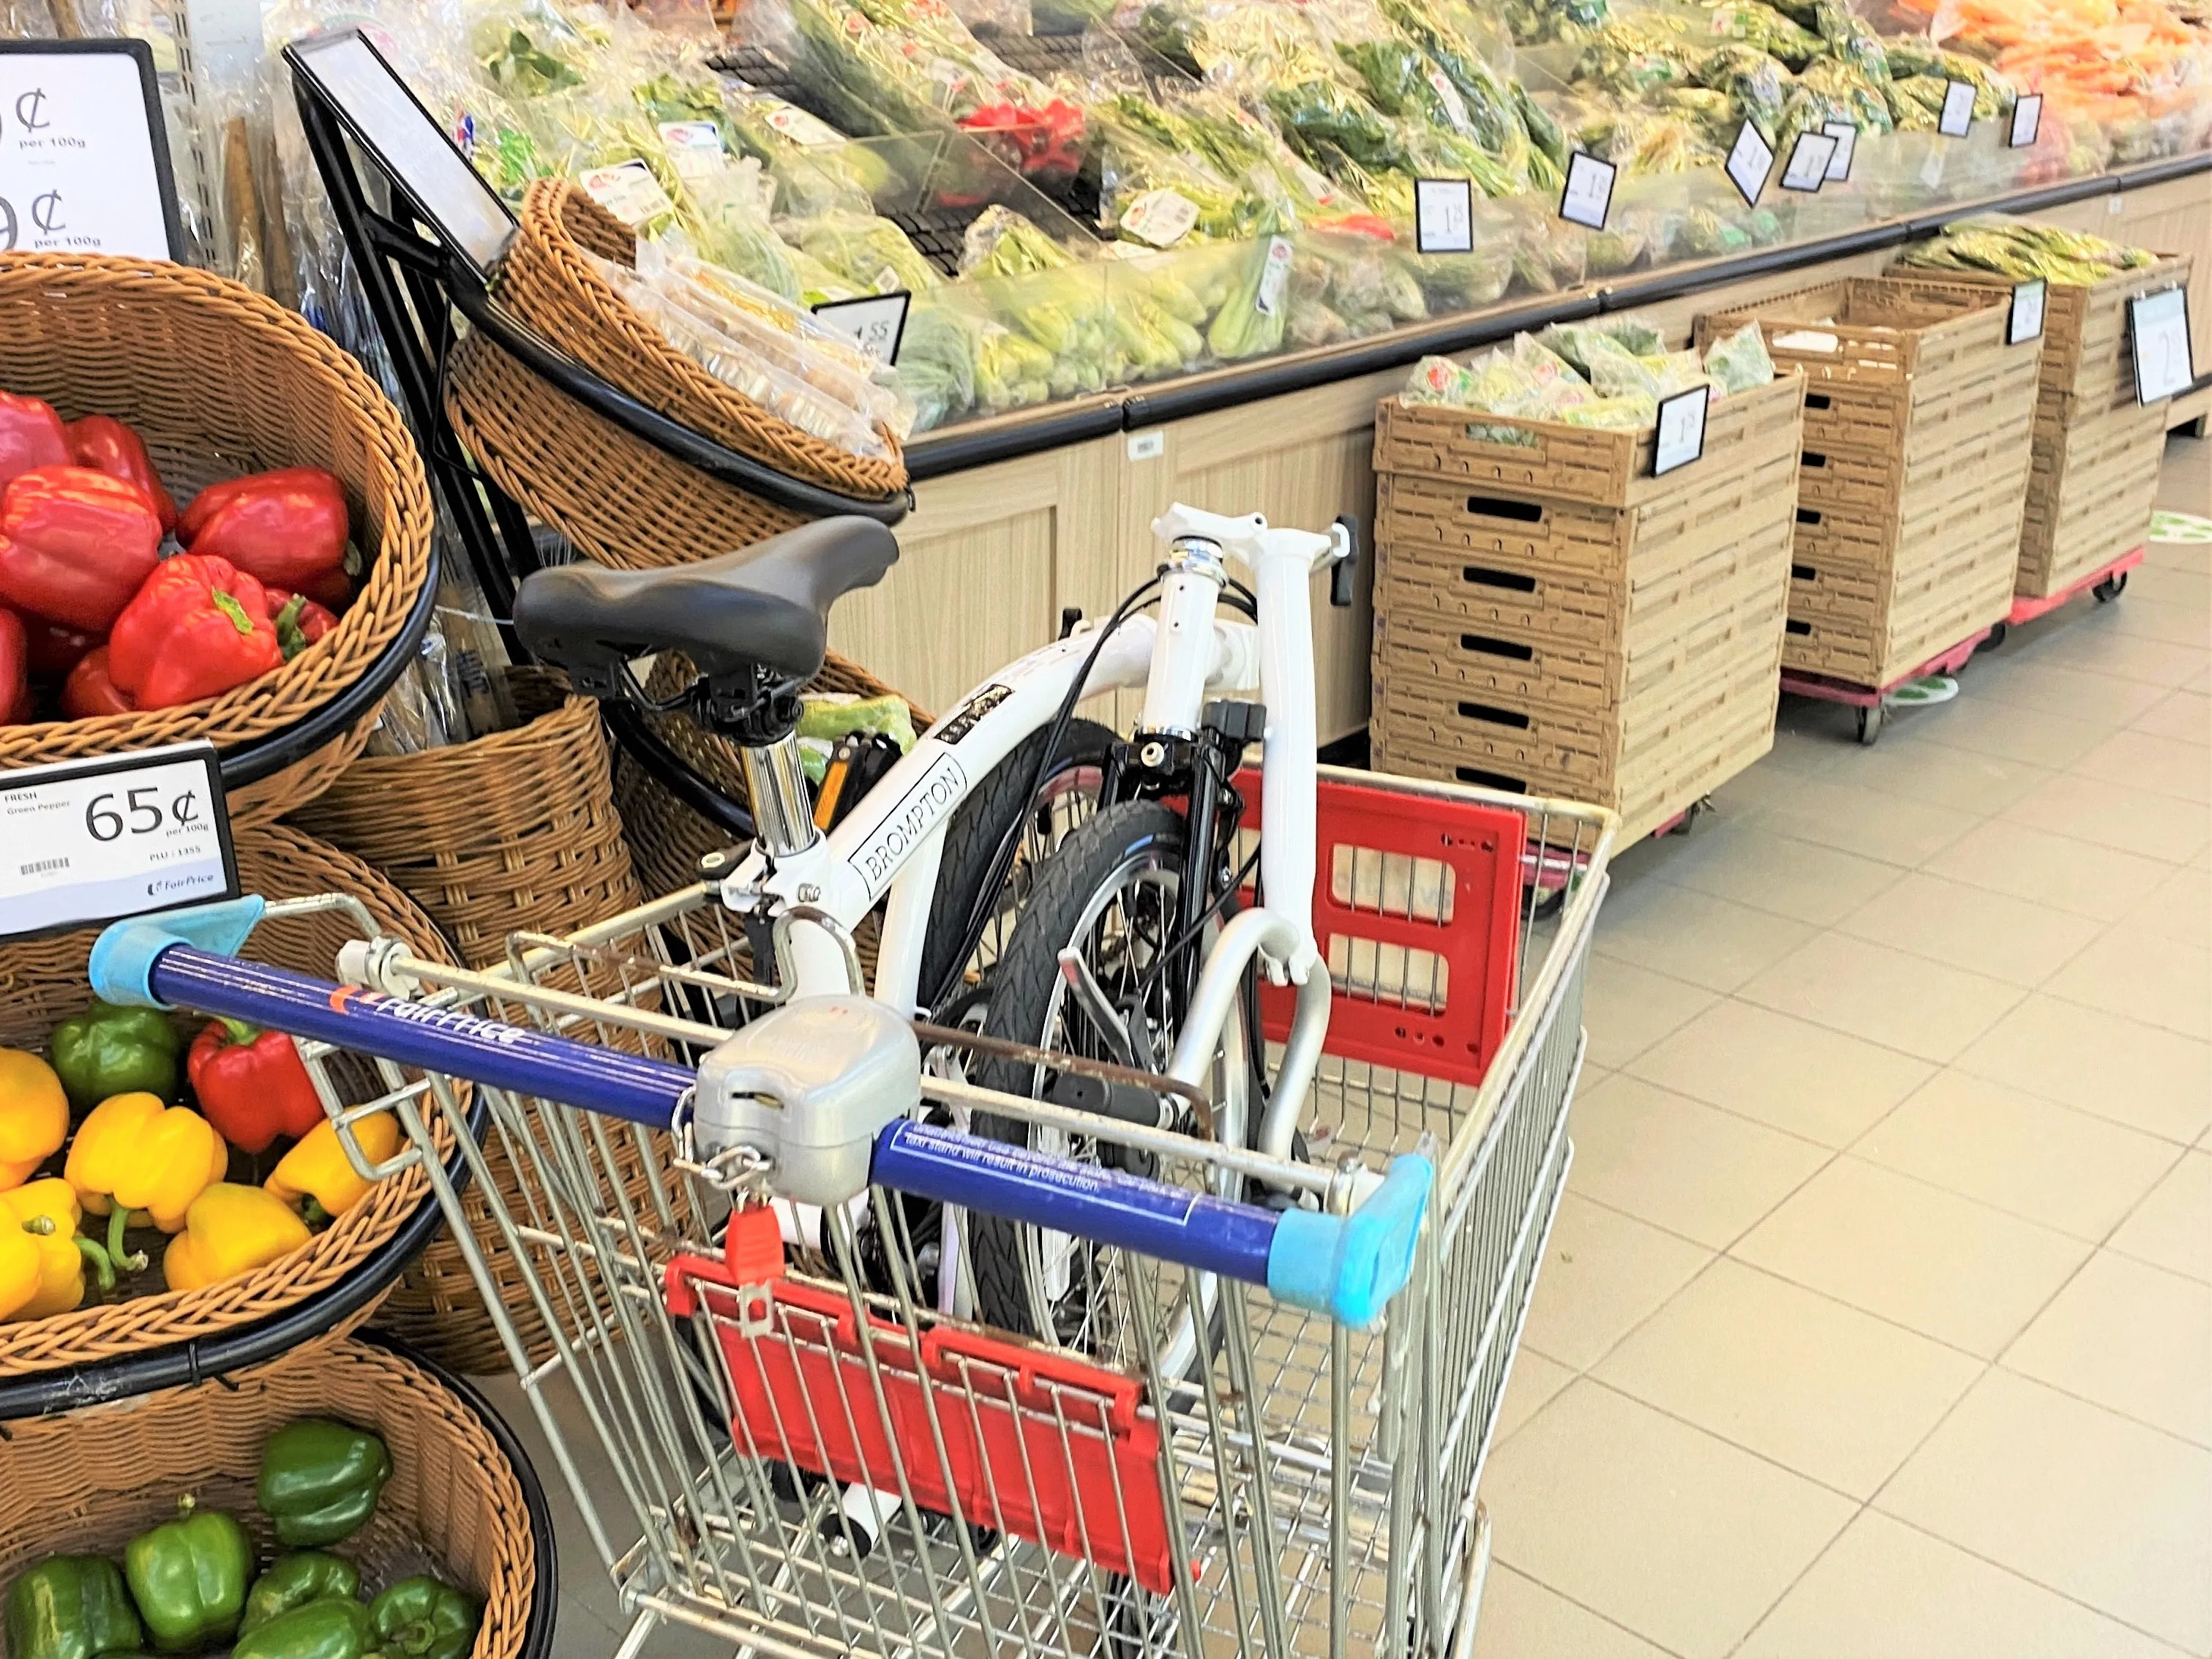 Brompton in a supermarket cart in Singapore